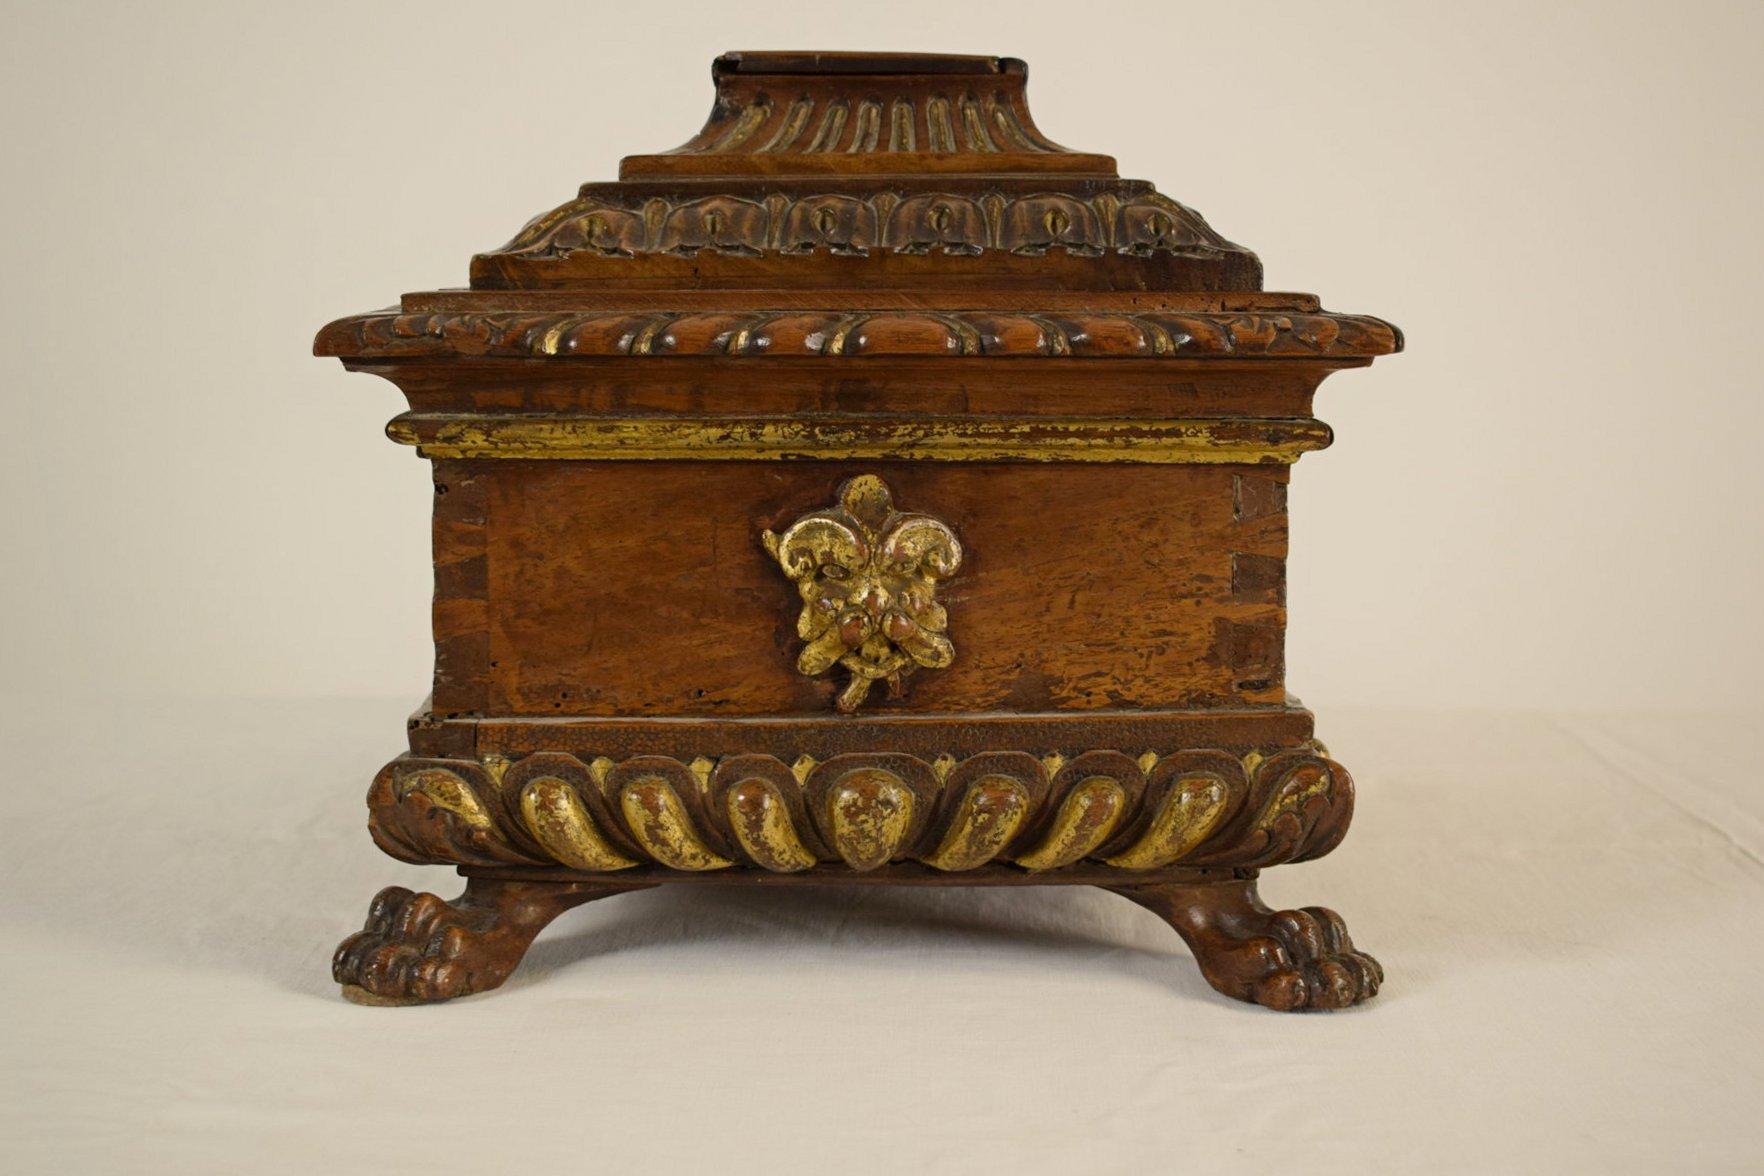 Italian 16th Century Tuscany Carved and Gilded Wood Box